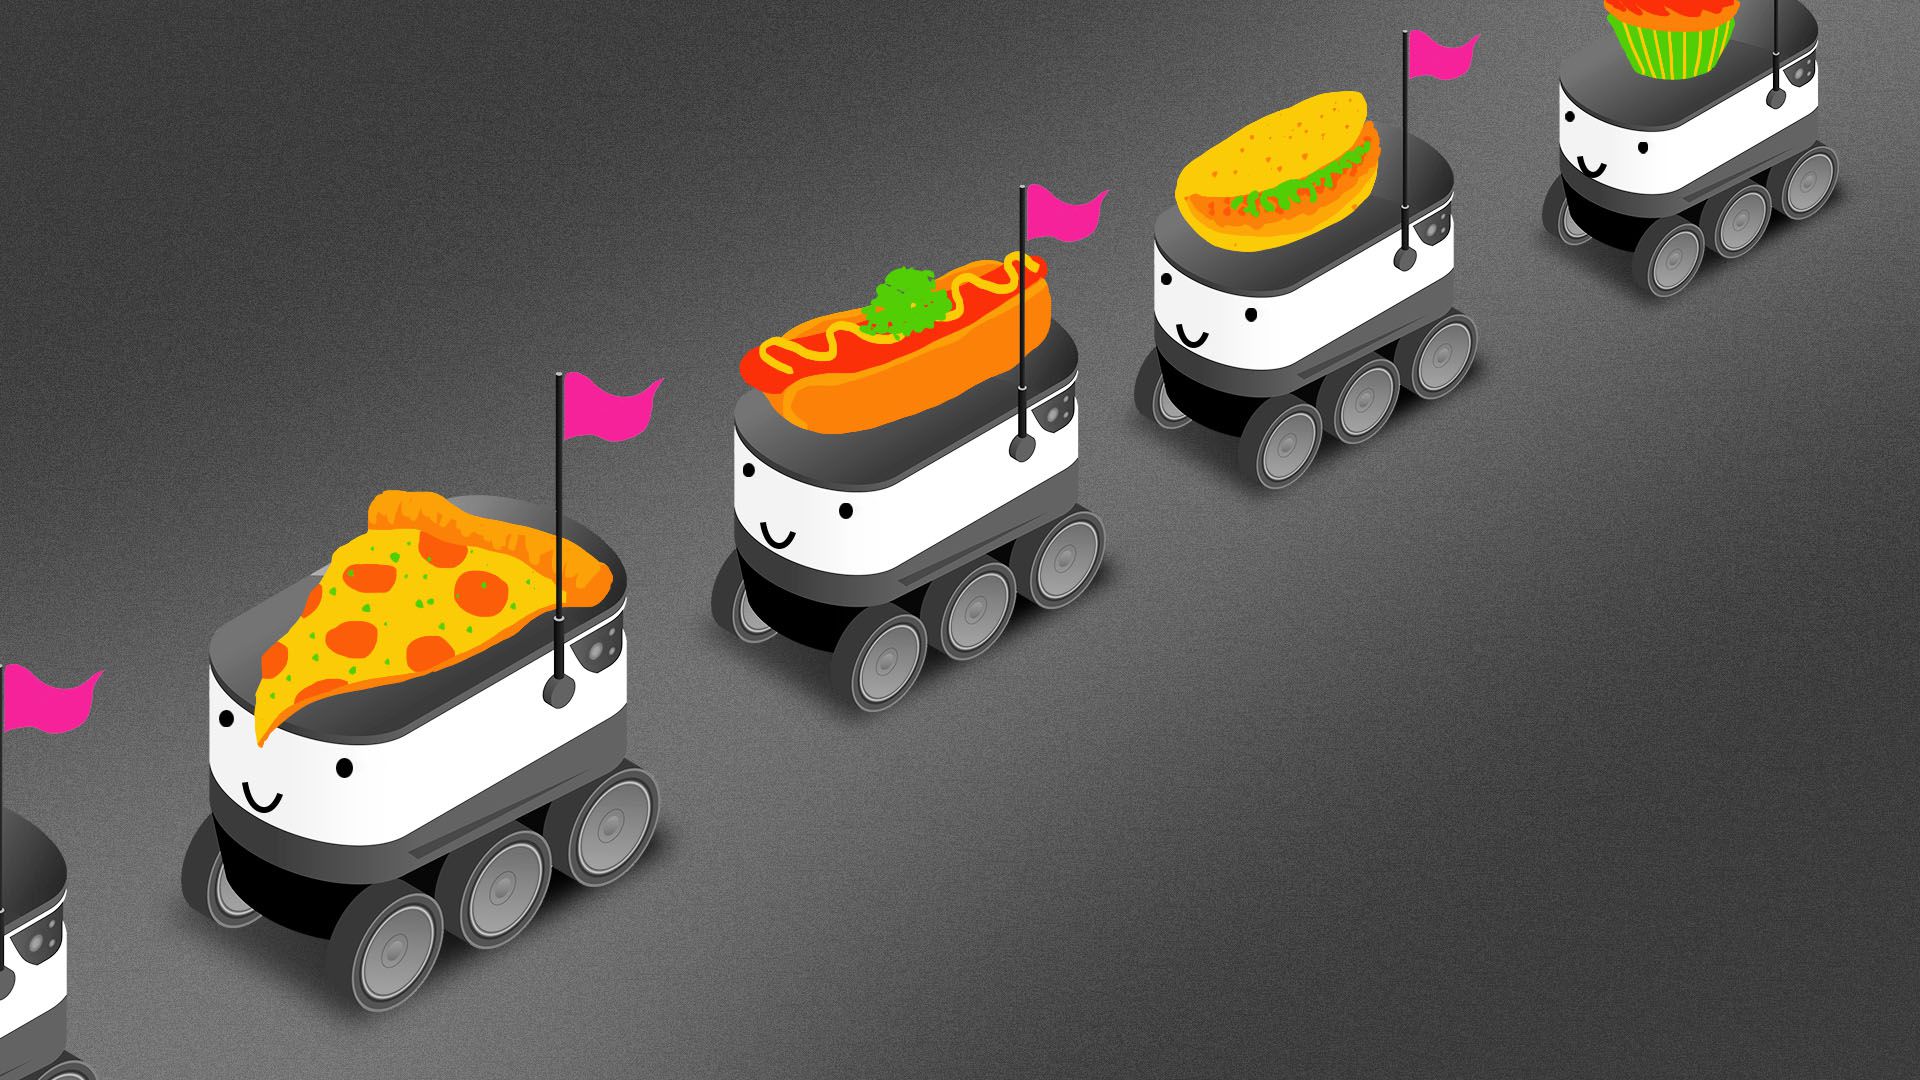 Brașov will be the first city in Romania where Glovo will deliver food using autonomous robots thumbnail